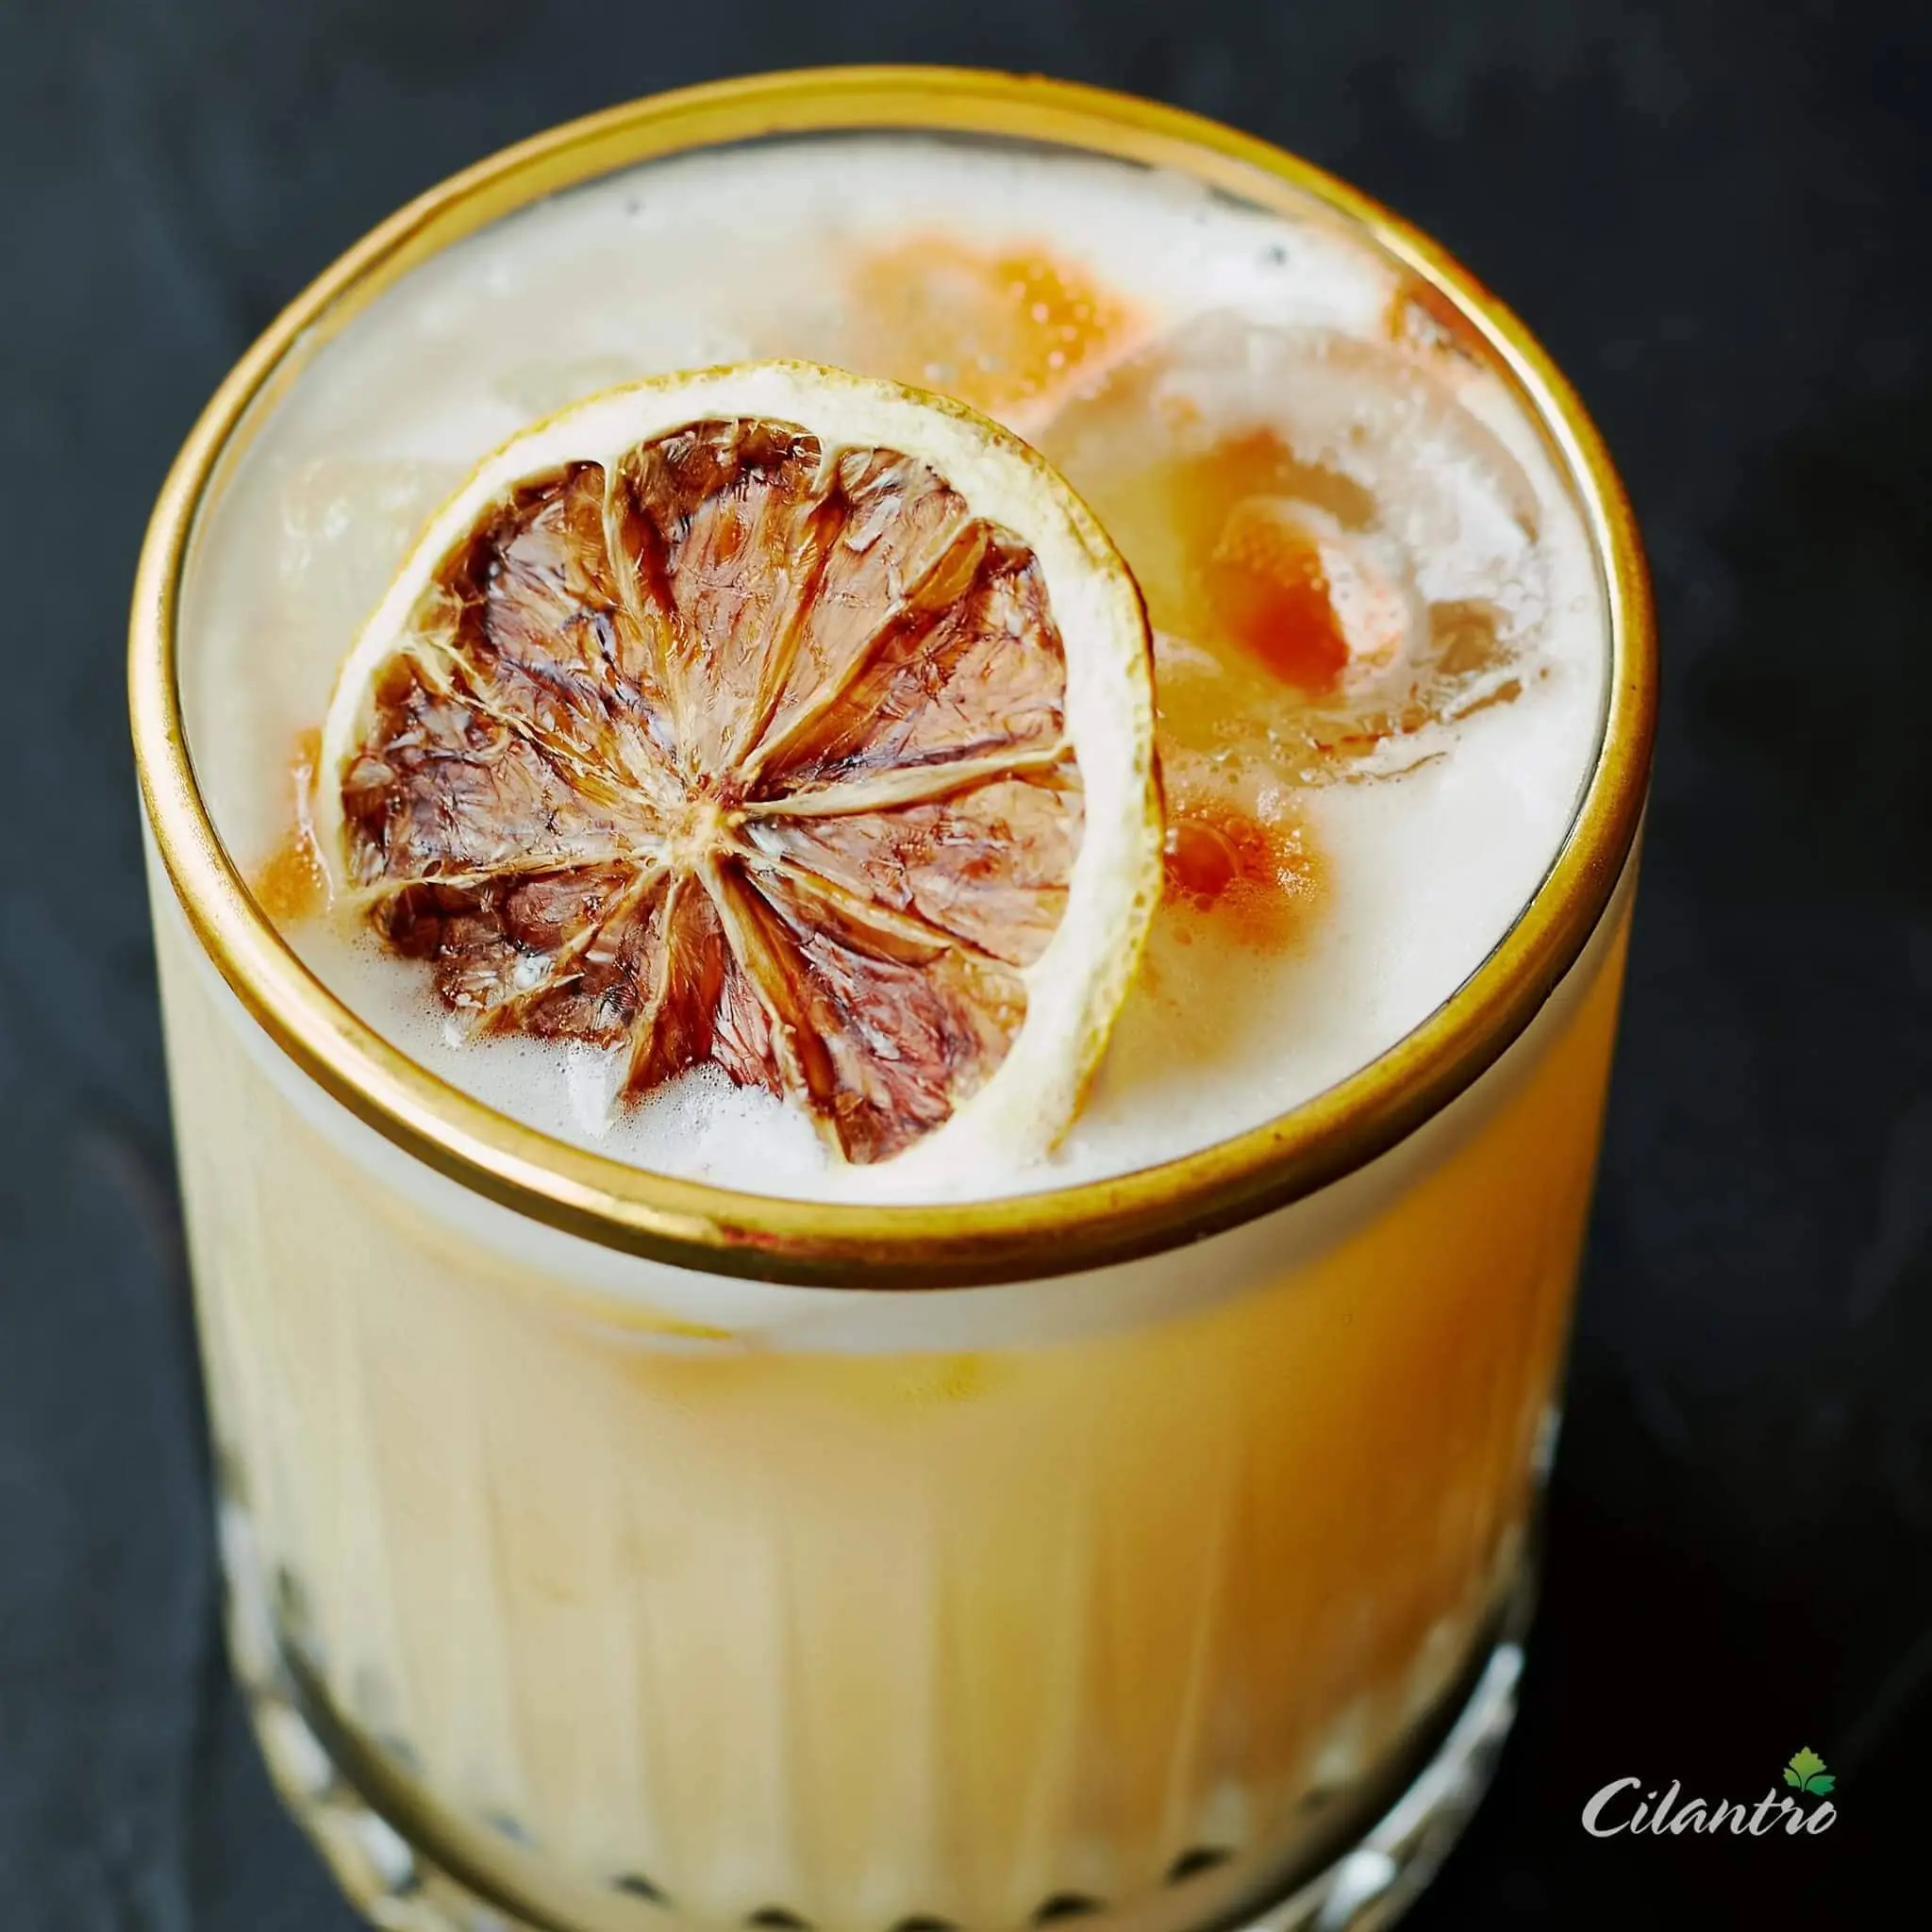 Cocktails are the language of celebration - Shake, Mix , blend the flavours